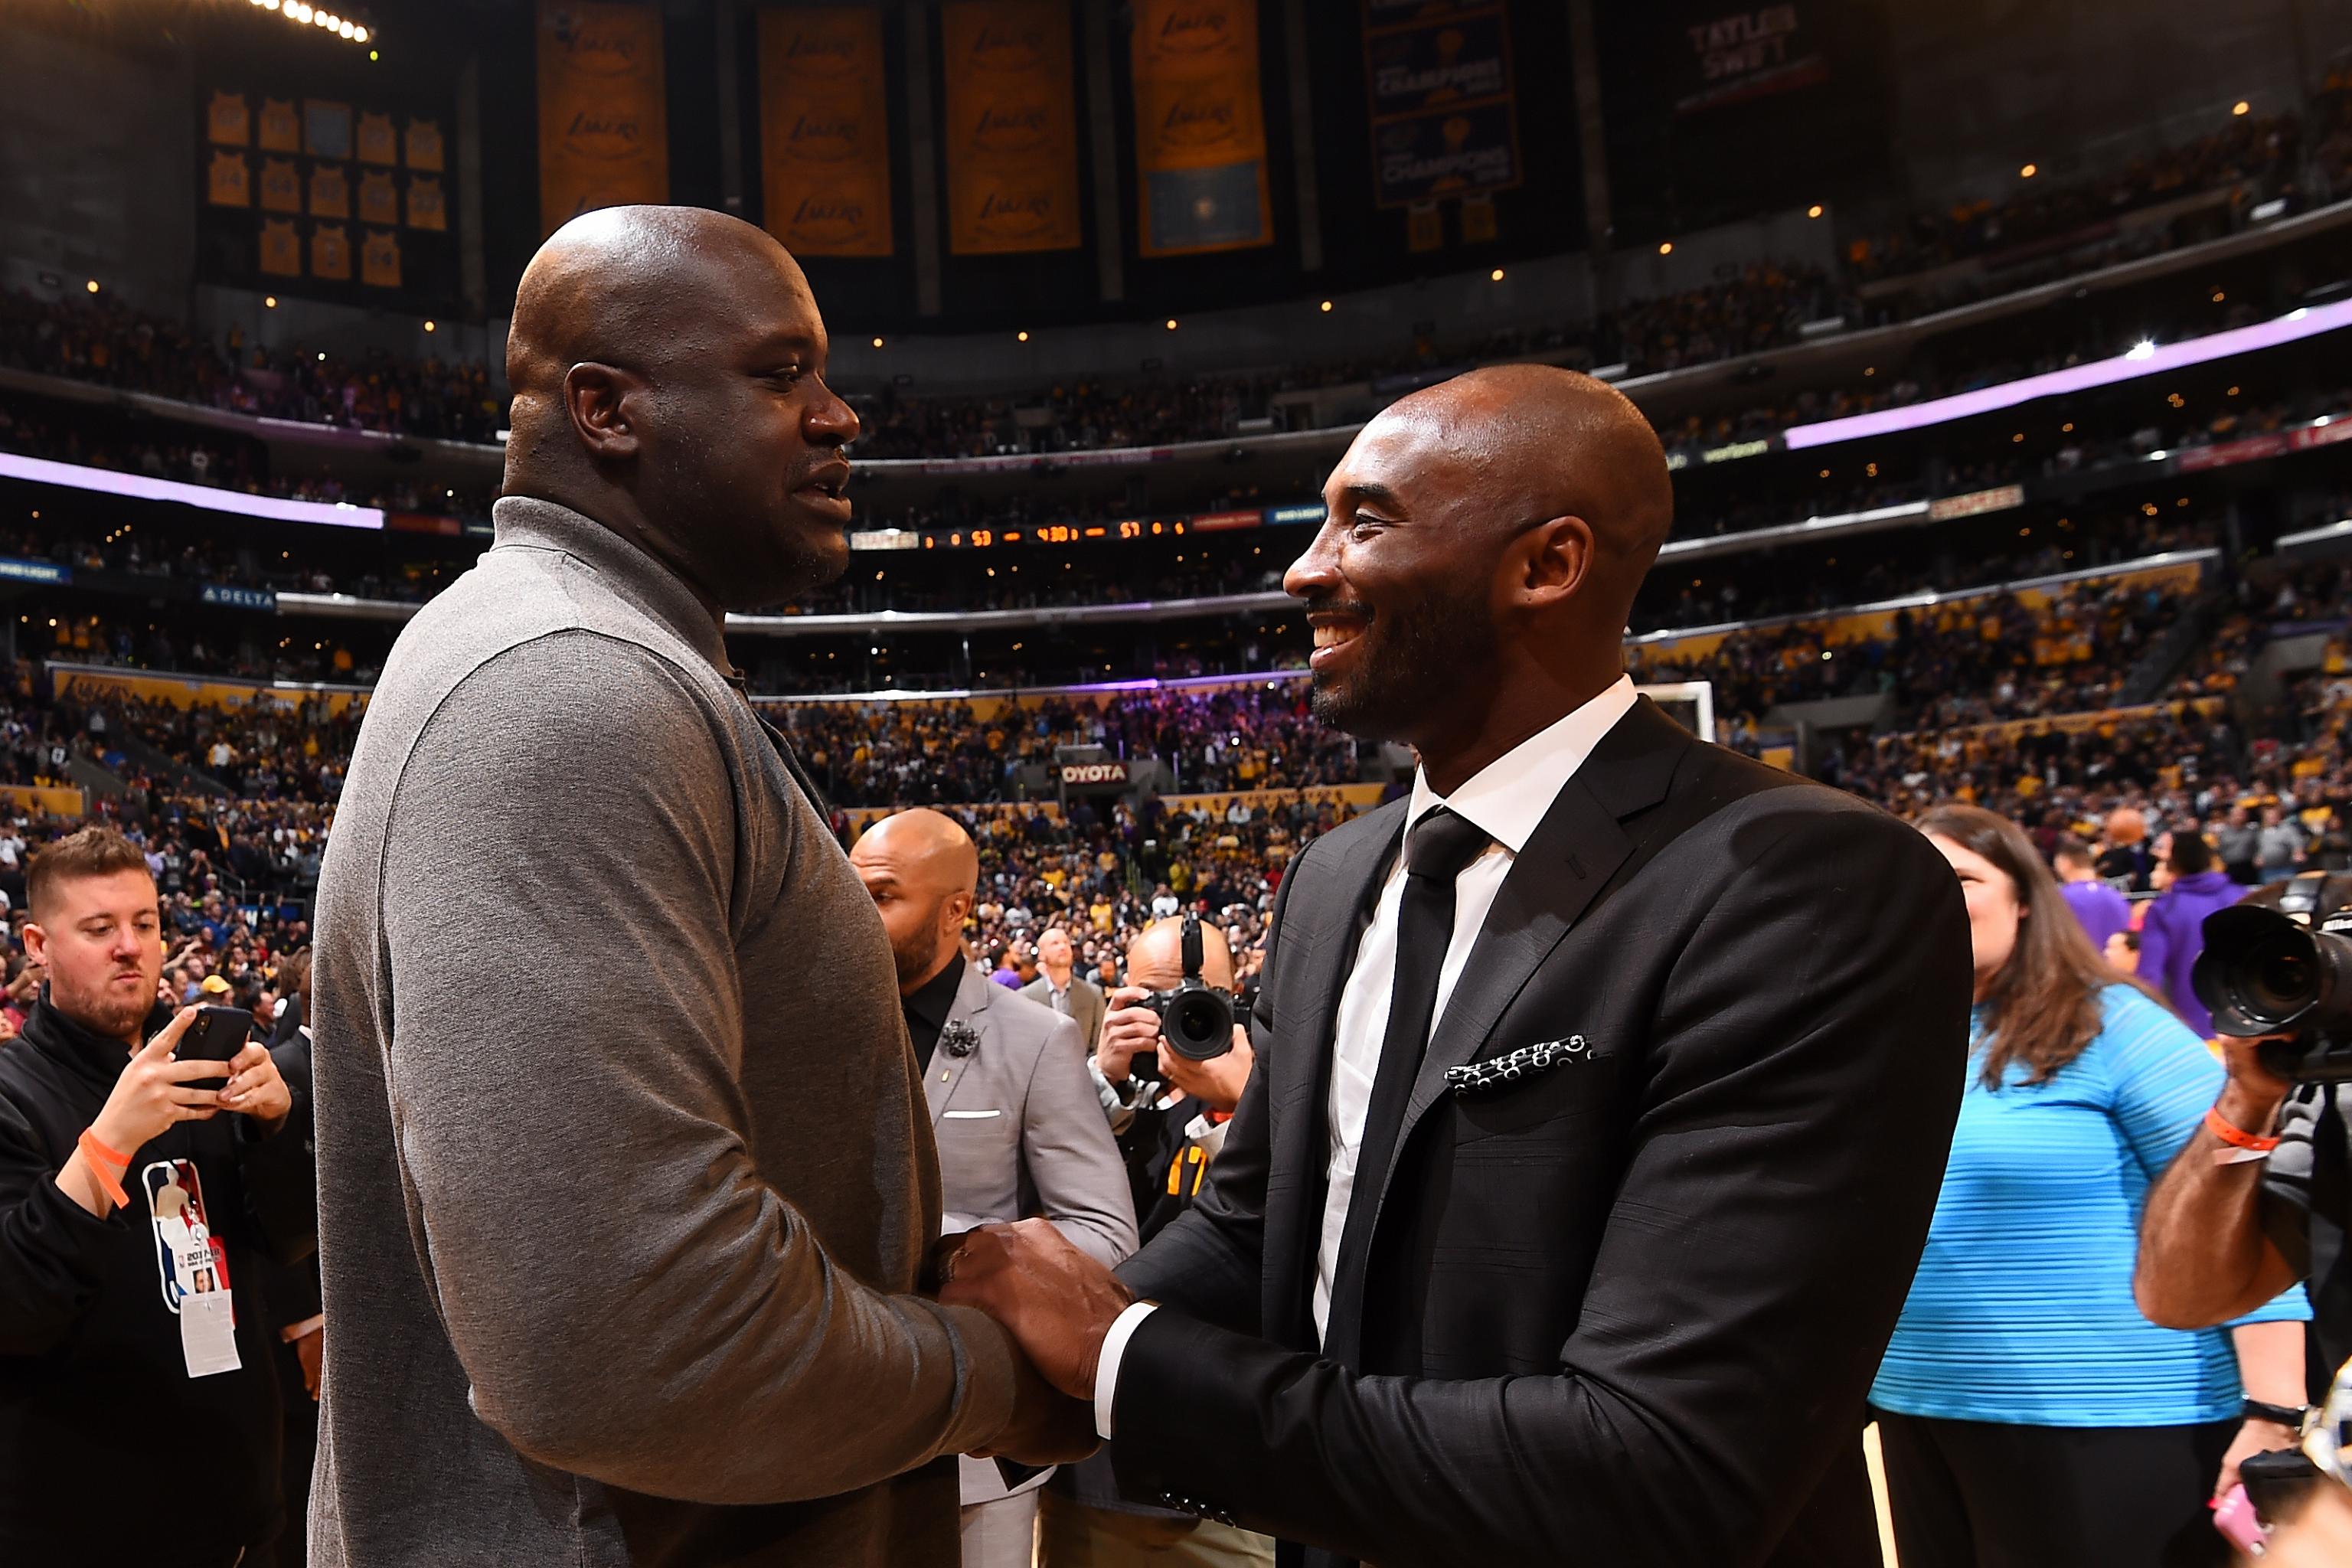 Lakers fan survey reveals lots of Shaq and Kobe love and hope for